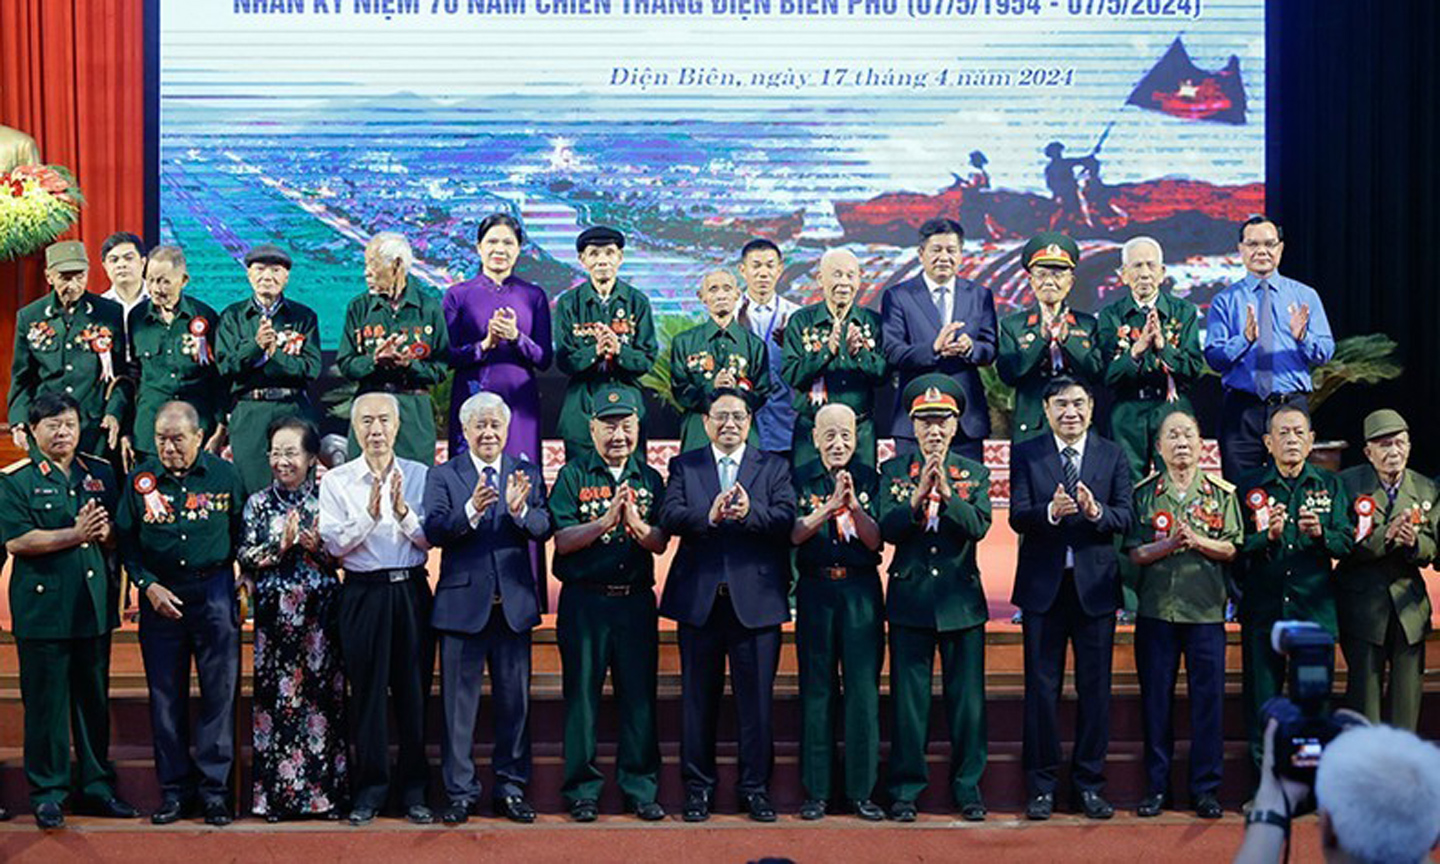 Prime Minister Pham Minh Chinh meets veteran soldiers, young volunteers and frontline workers who directly participated in the Dien Bien Phu Campaign in 1954 (Photo: VGP)